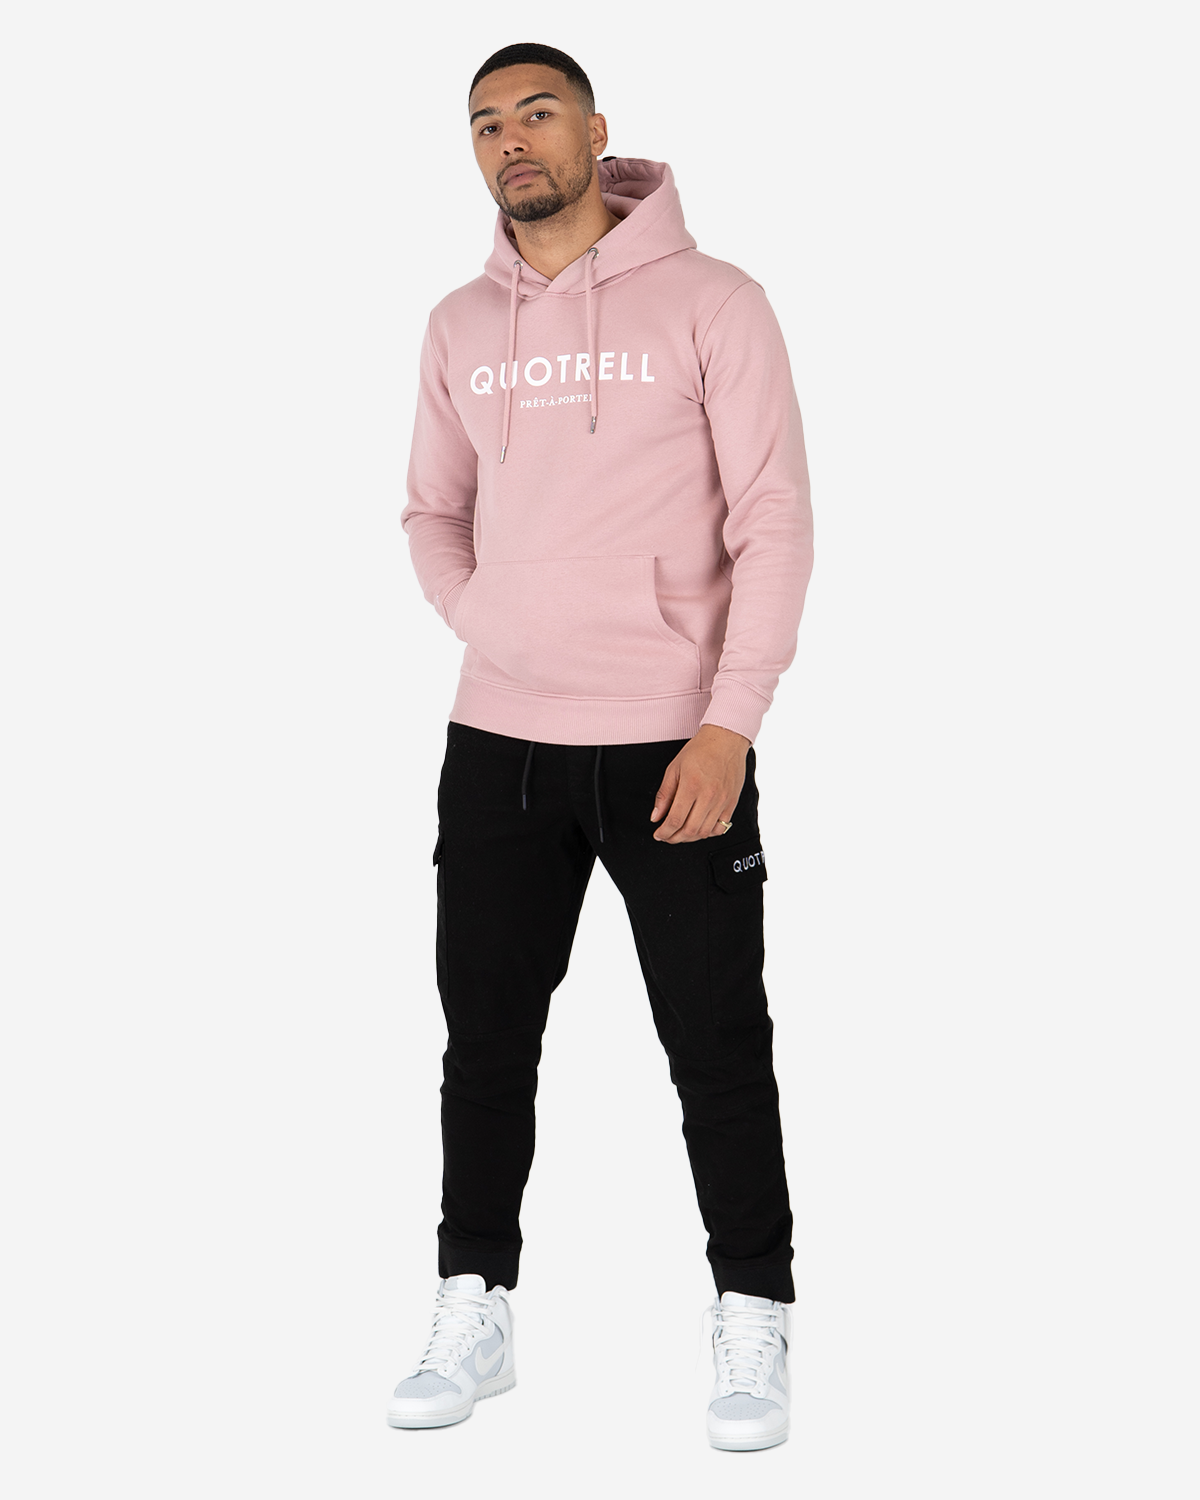 Quotrell Basic Hoodie Mauve - Wit